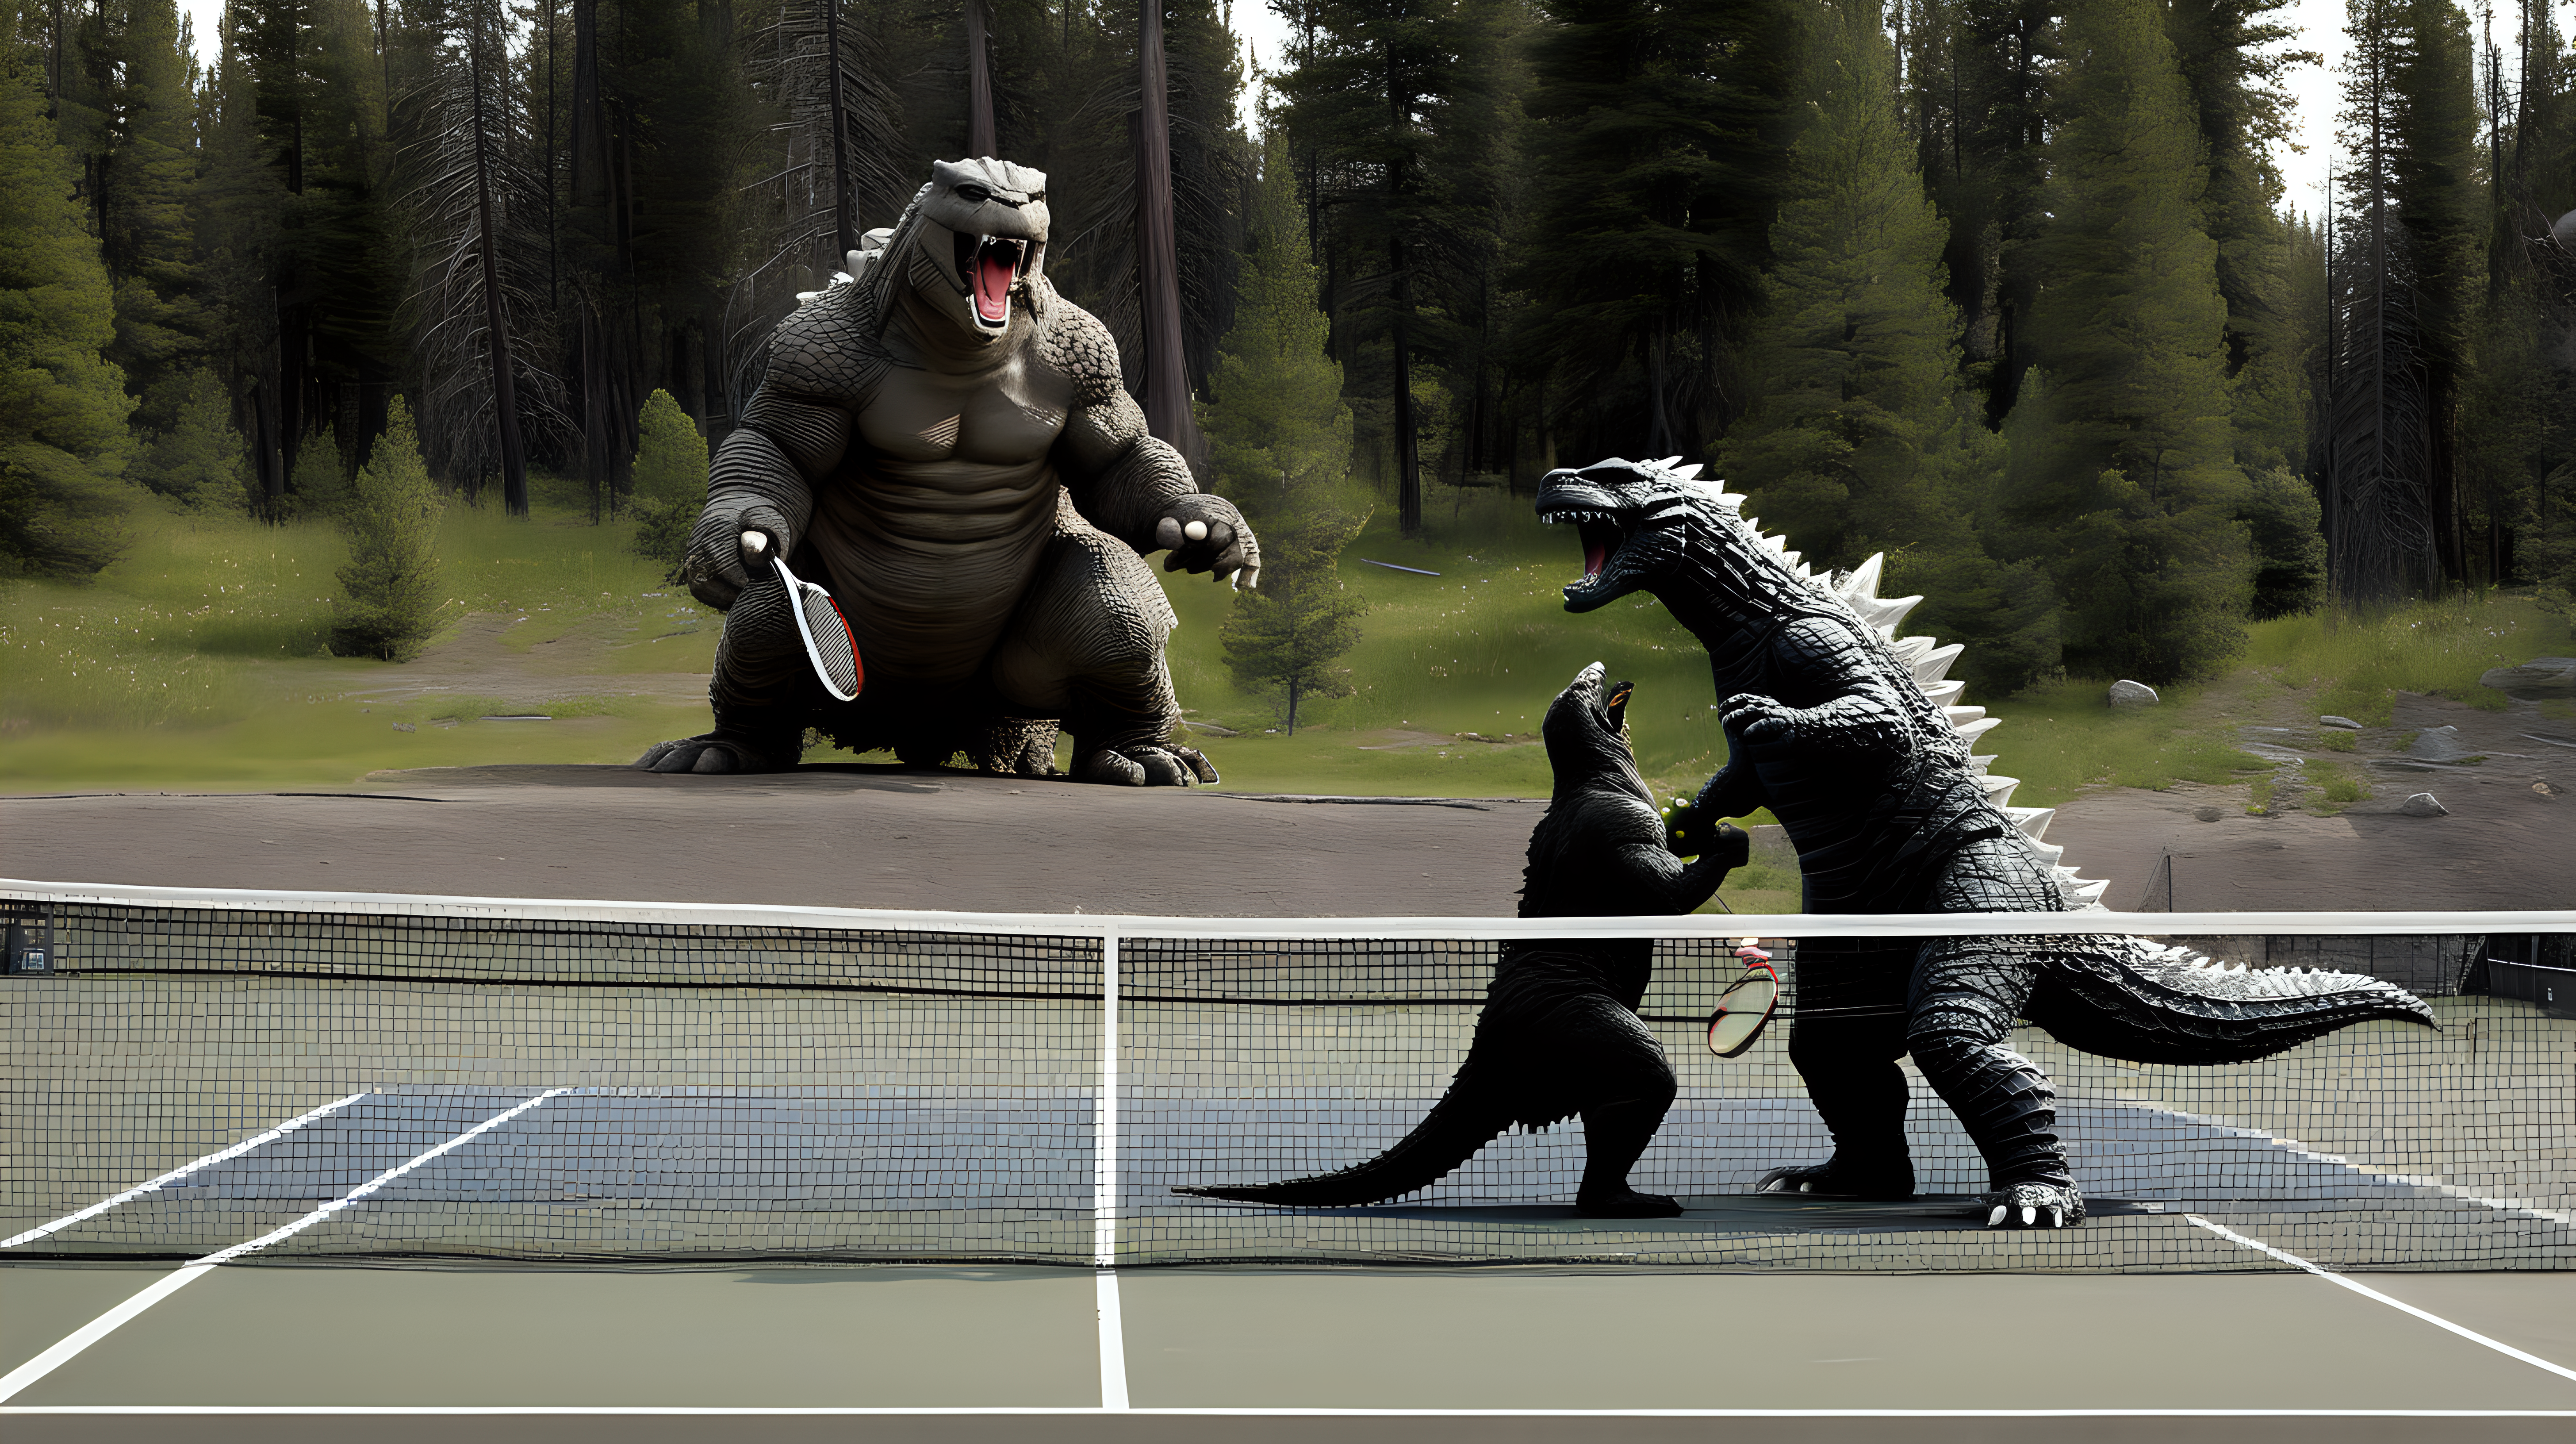 Thor and Godzilla playing tennis in Yellowstone National Park